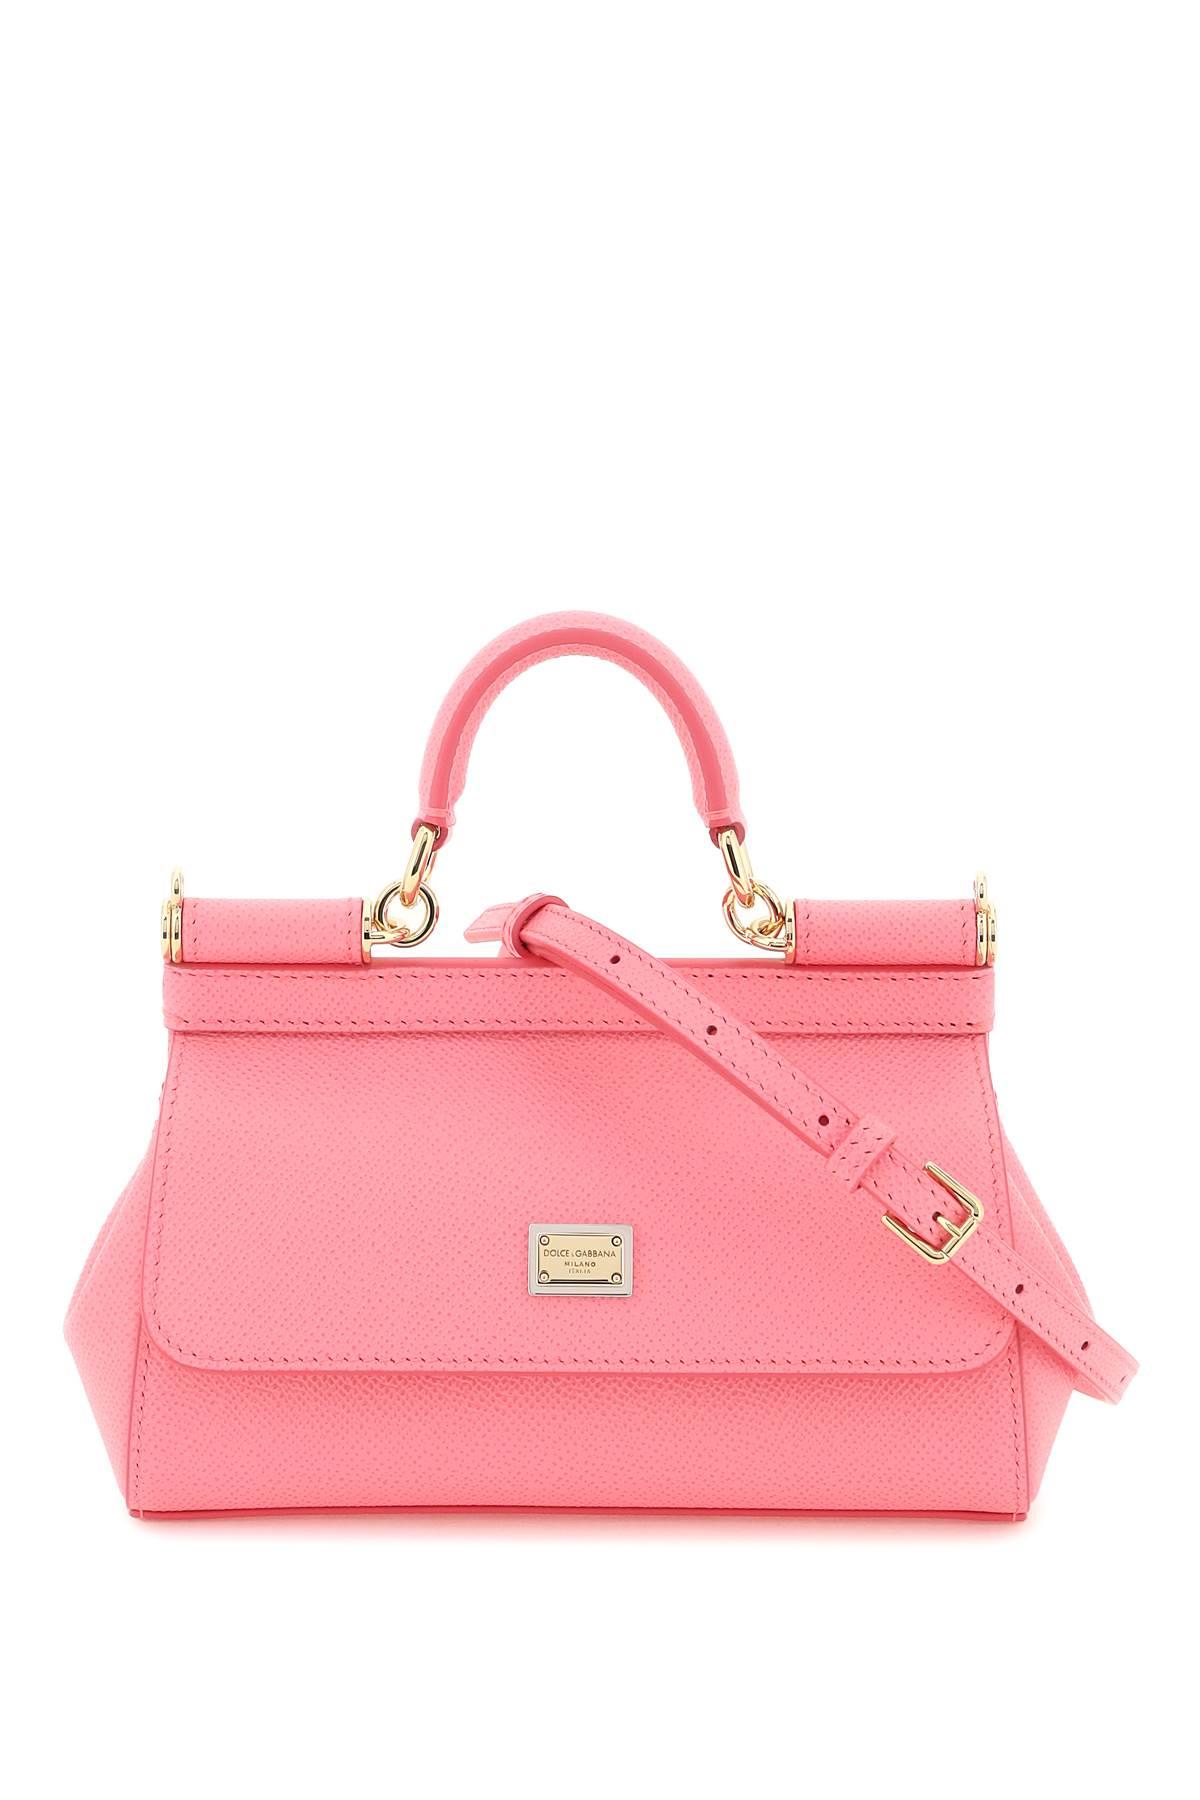 Dolce & Gabbana Sicily Small Bag In Pink